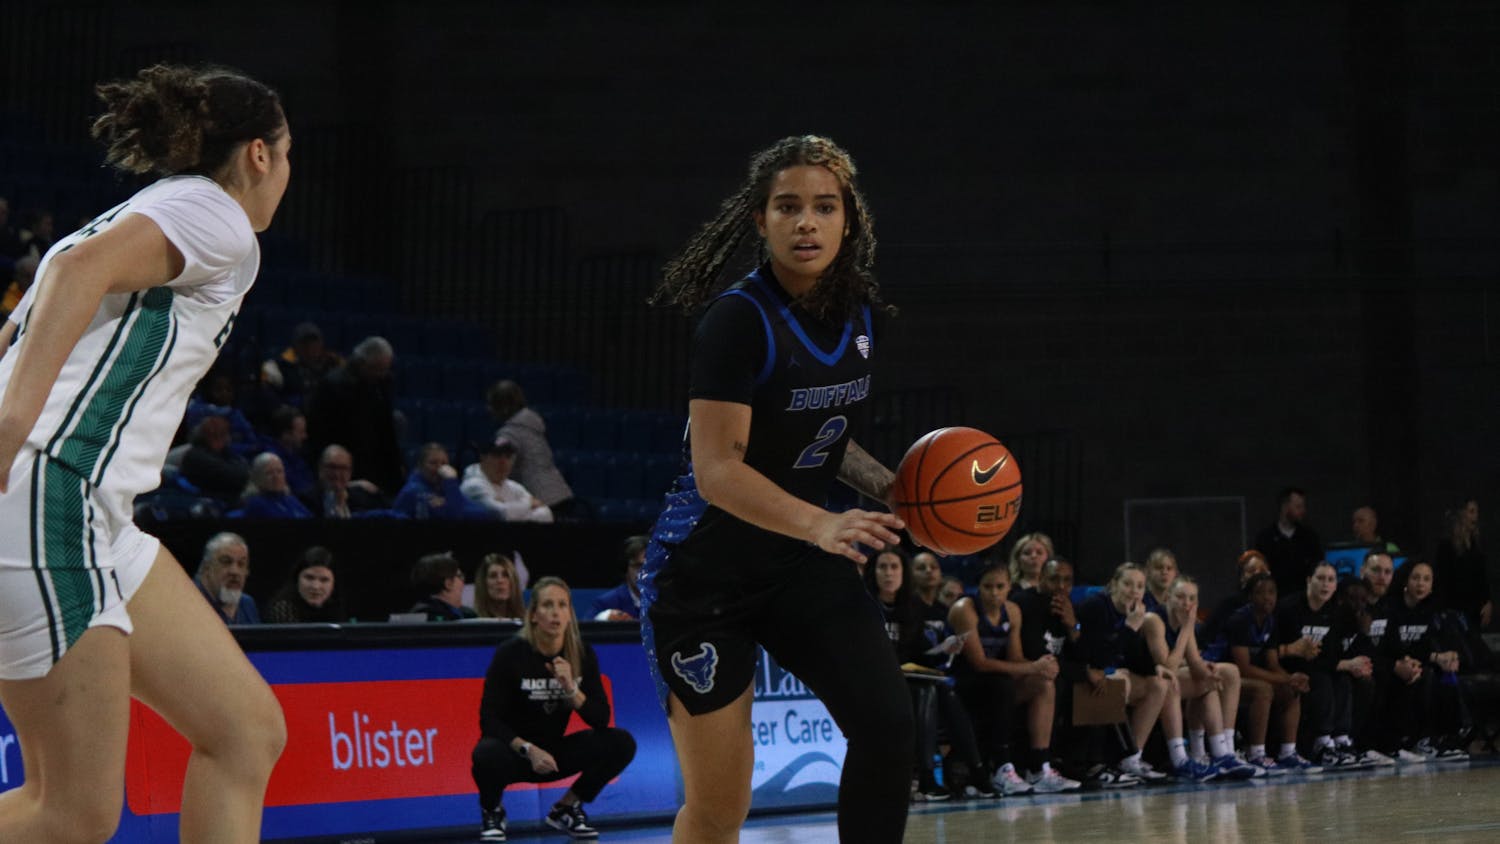 During her impressive debut season, Lewis-Williams averaged 11.8 points, 5.2 rebounds, 2.8 assists, and 1.5 steals per game on an efficient 46% from the field. &nbsp;